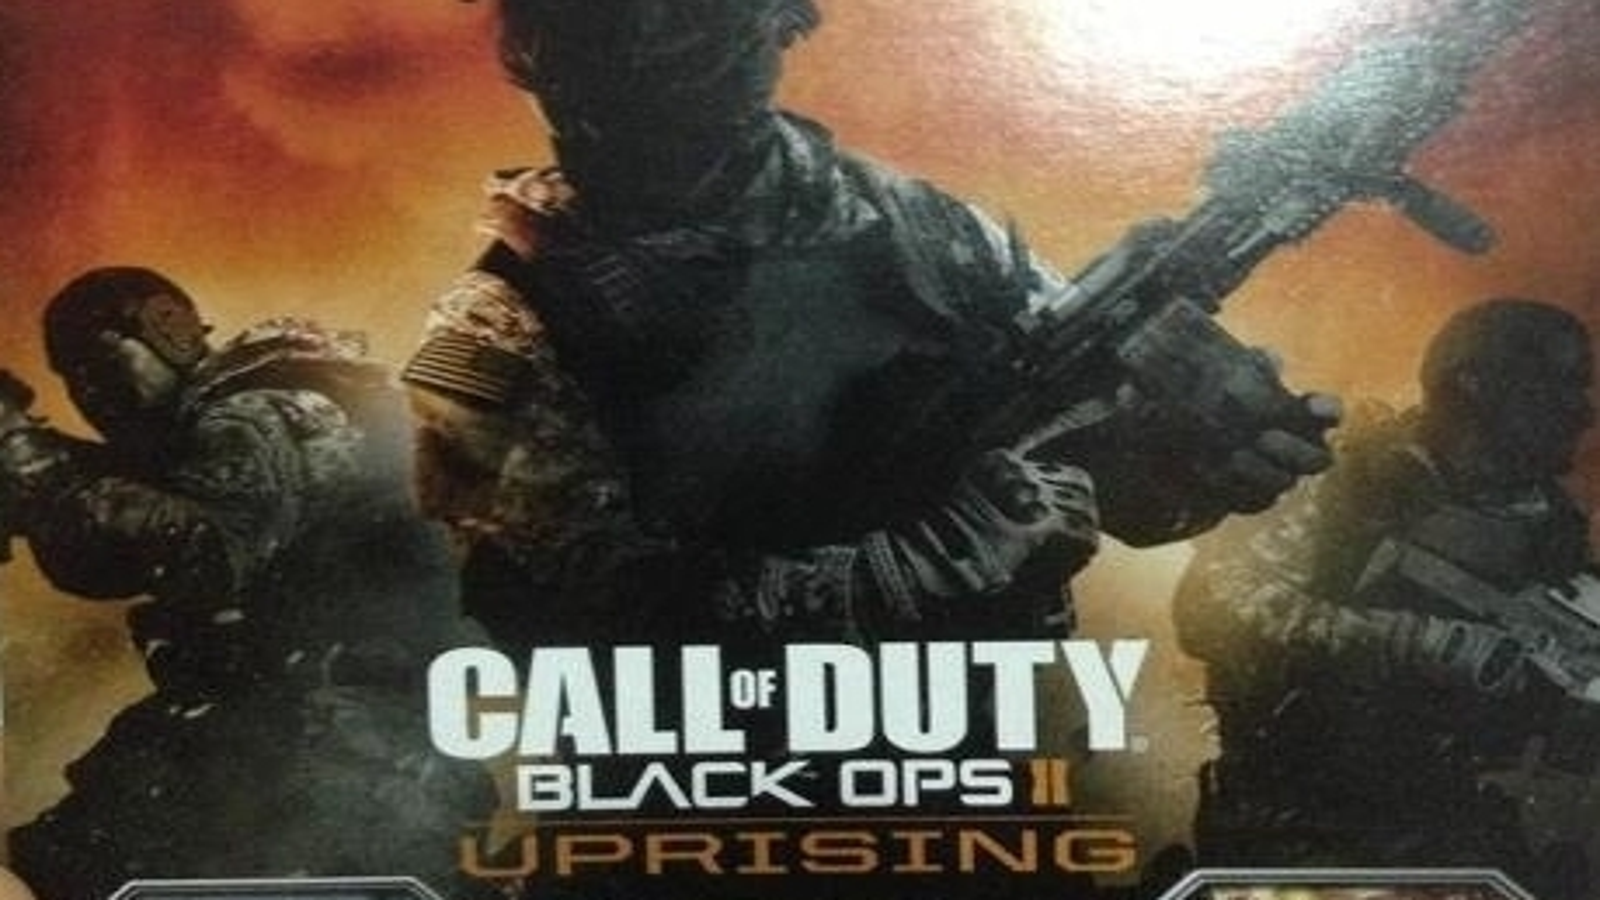 Call of Duty: Black Ops II Preview - Black Ops II Uprising Map